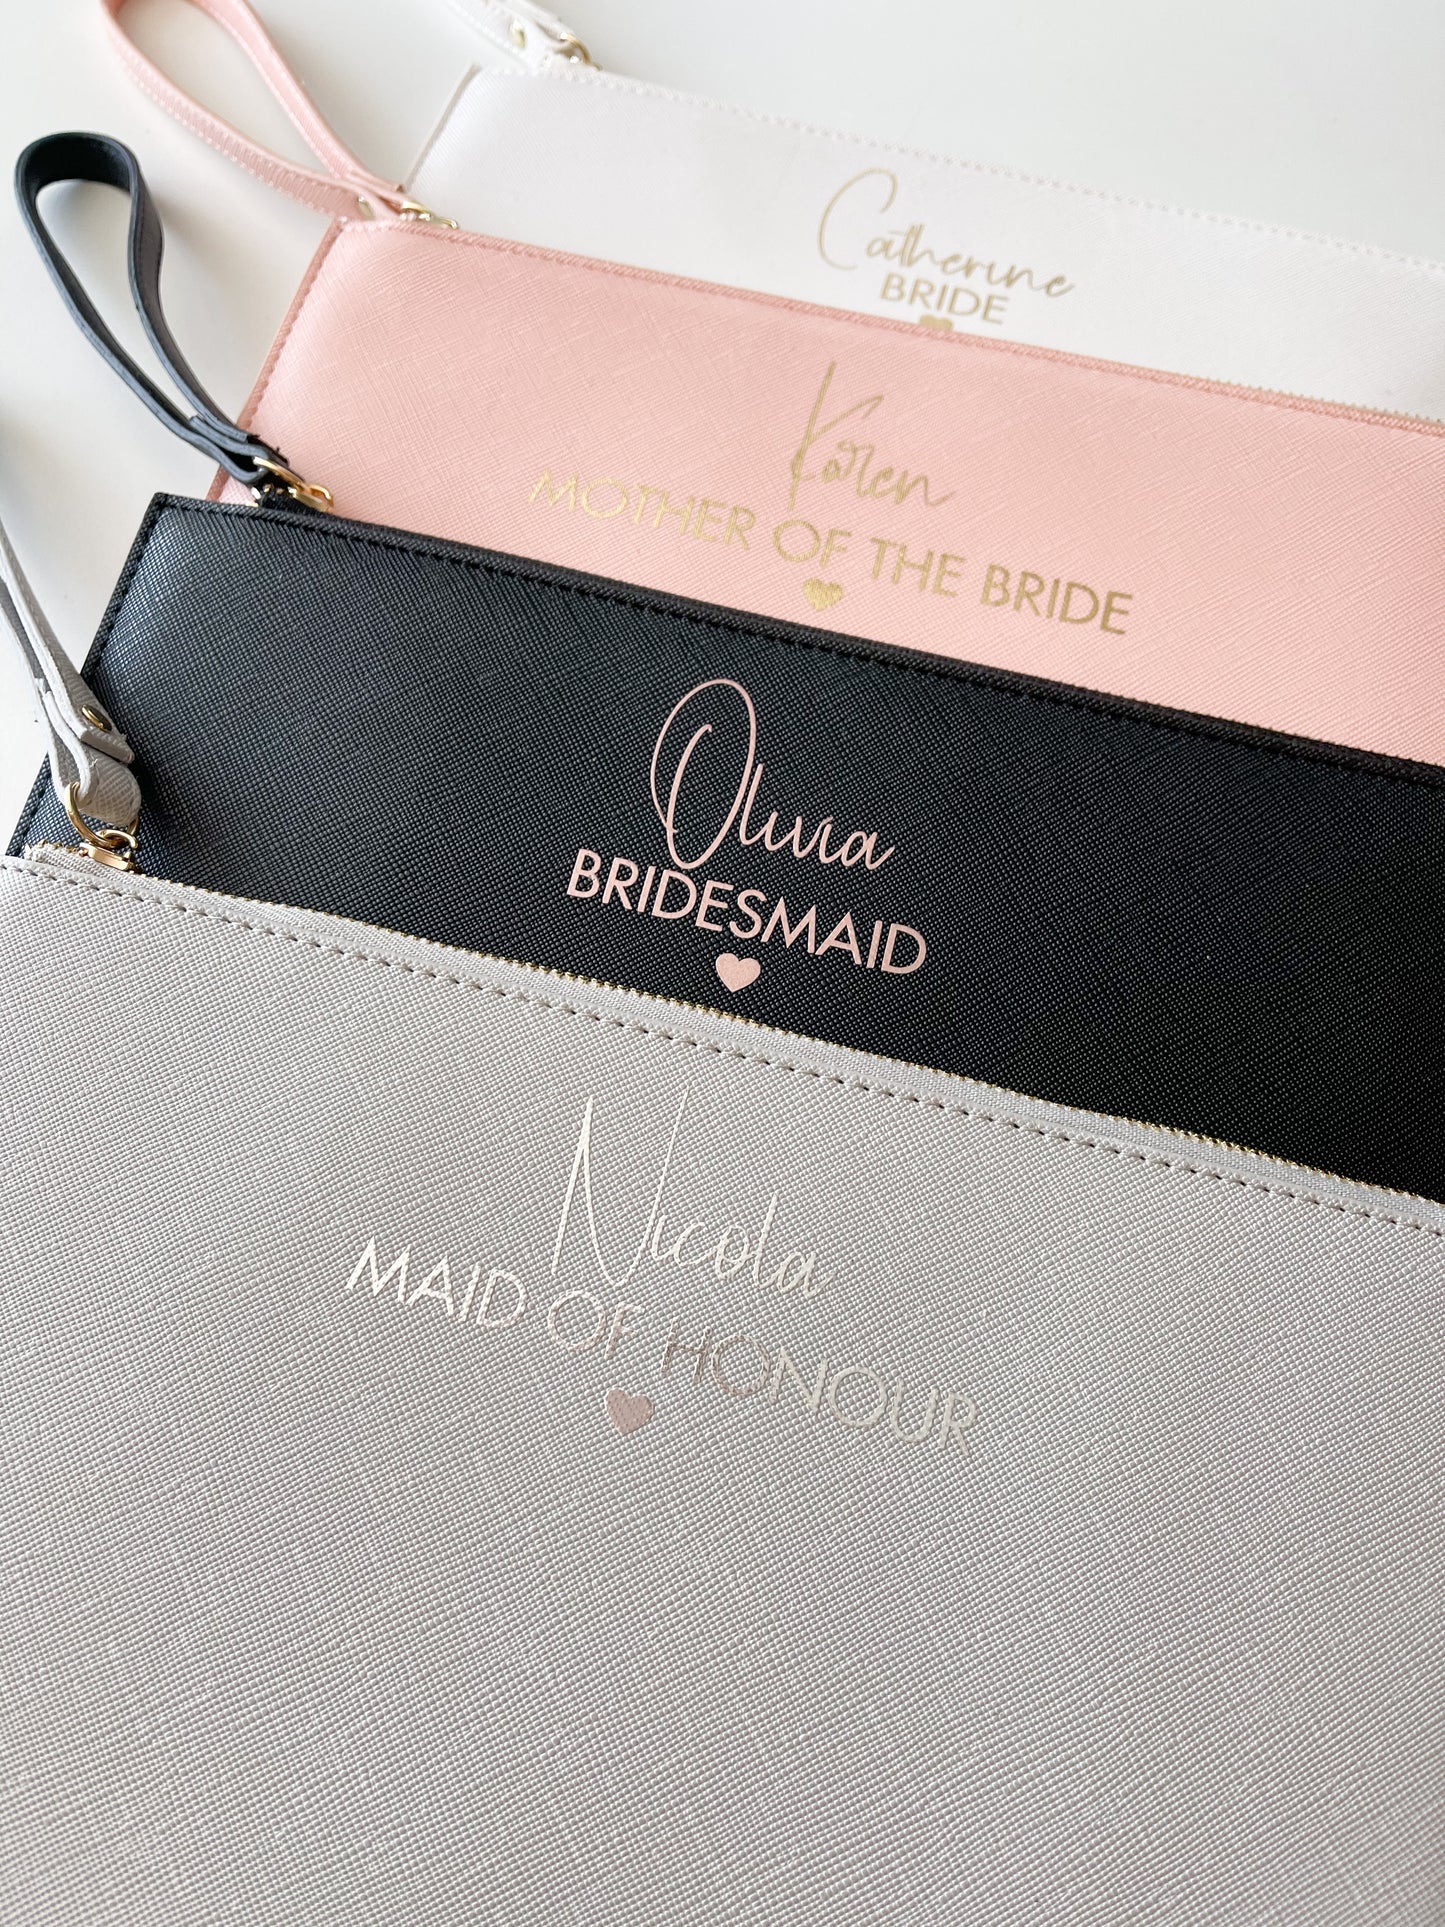 Personalised Luxury Bridal Pouch Bag - “Olivia design”